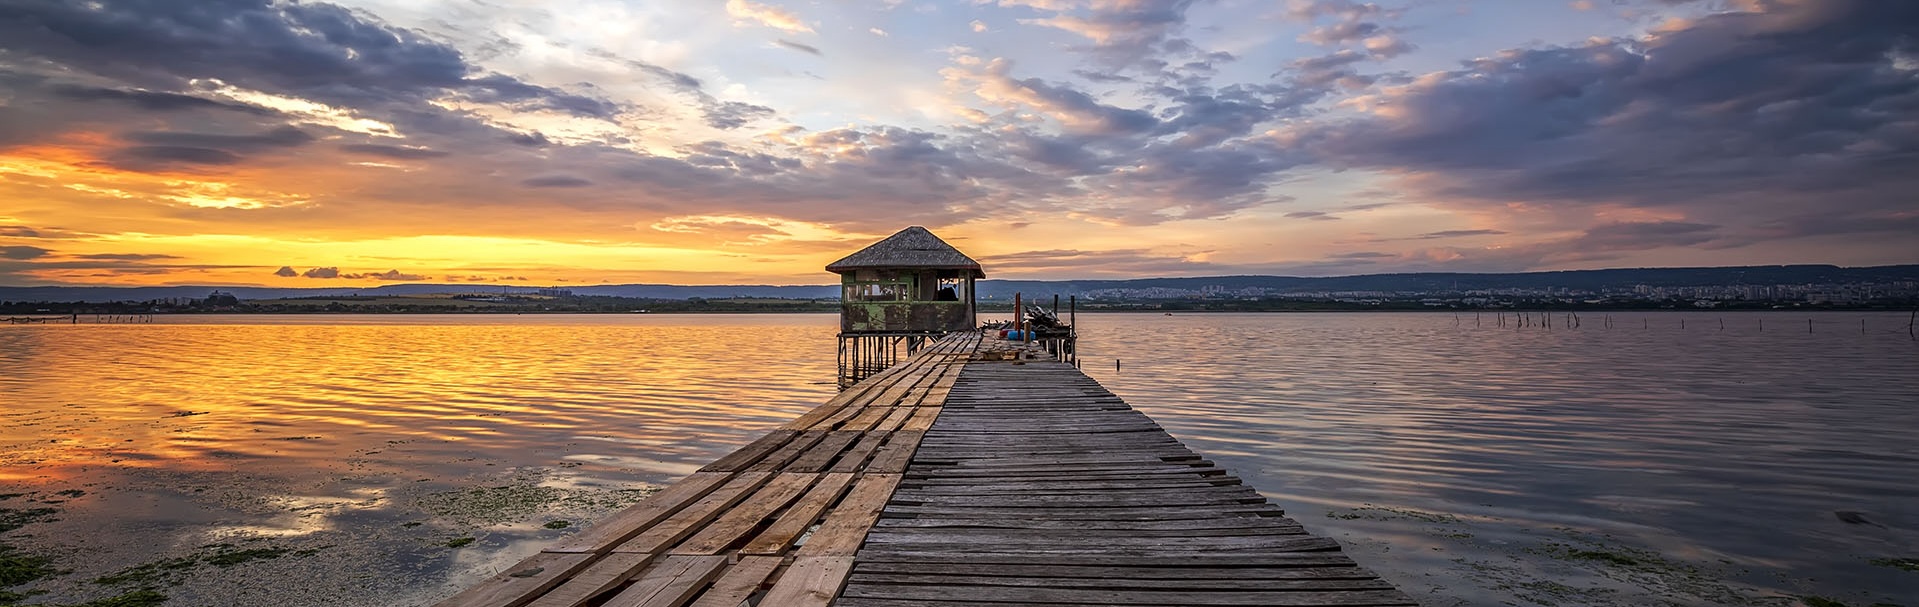 Exciting colorful long exposure landscape on a lake with a wooden pier and small house in the end.